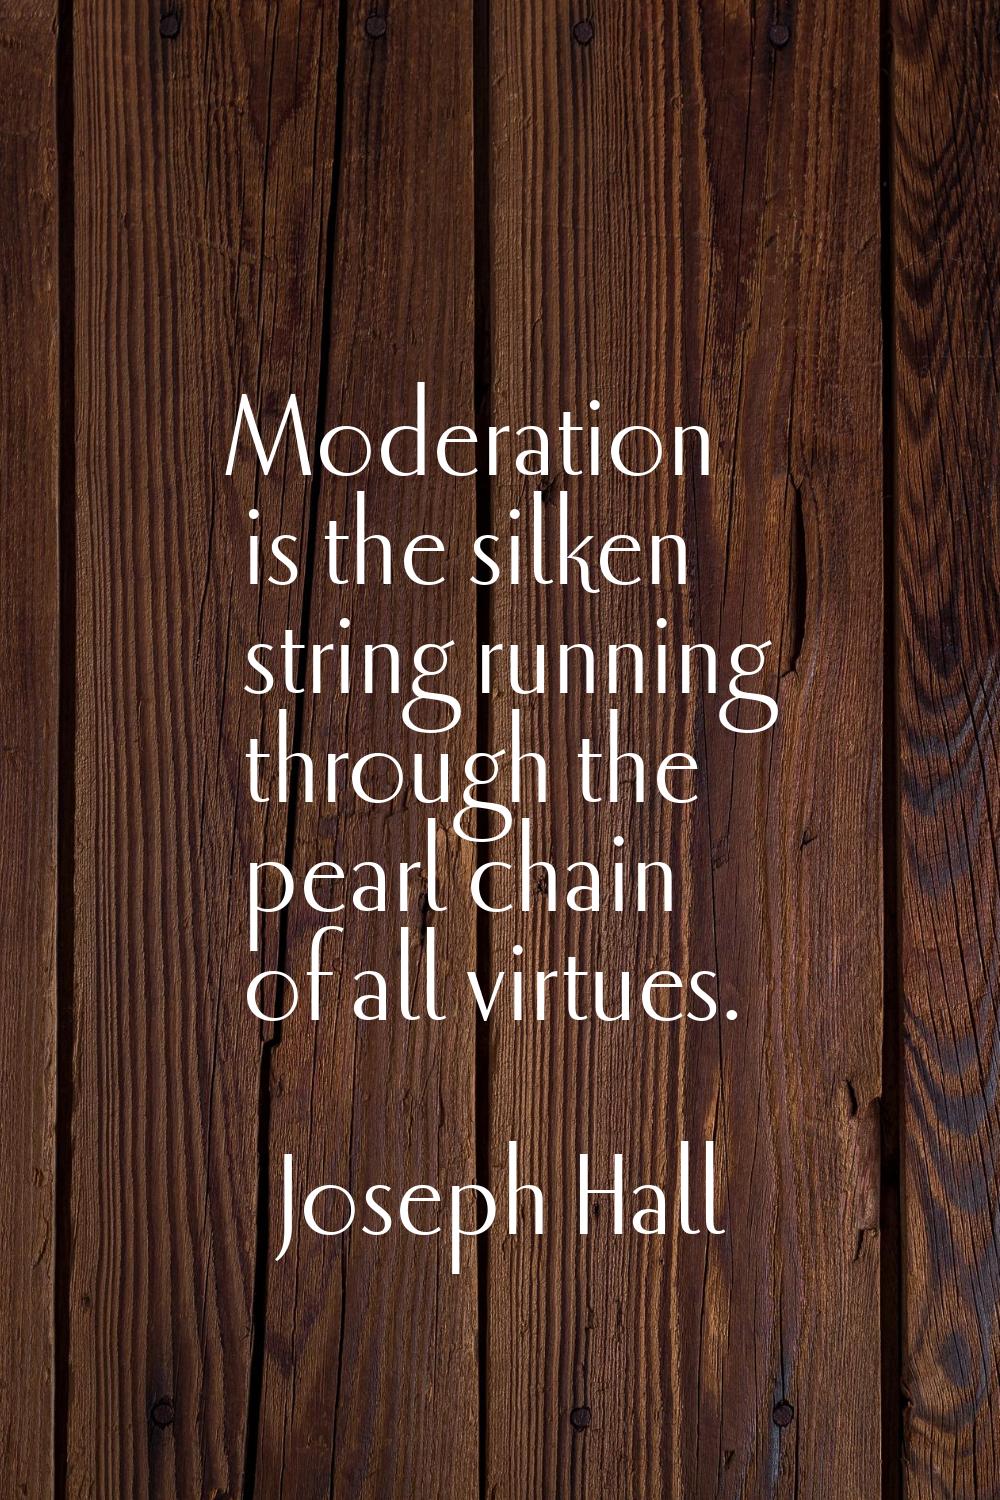 Moderation is the silken string running through the pearl chain of all virtues.